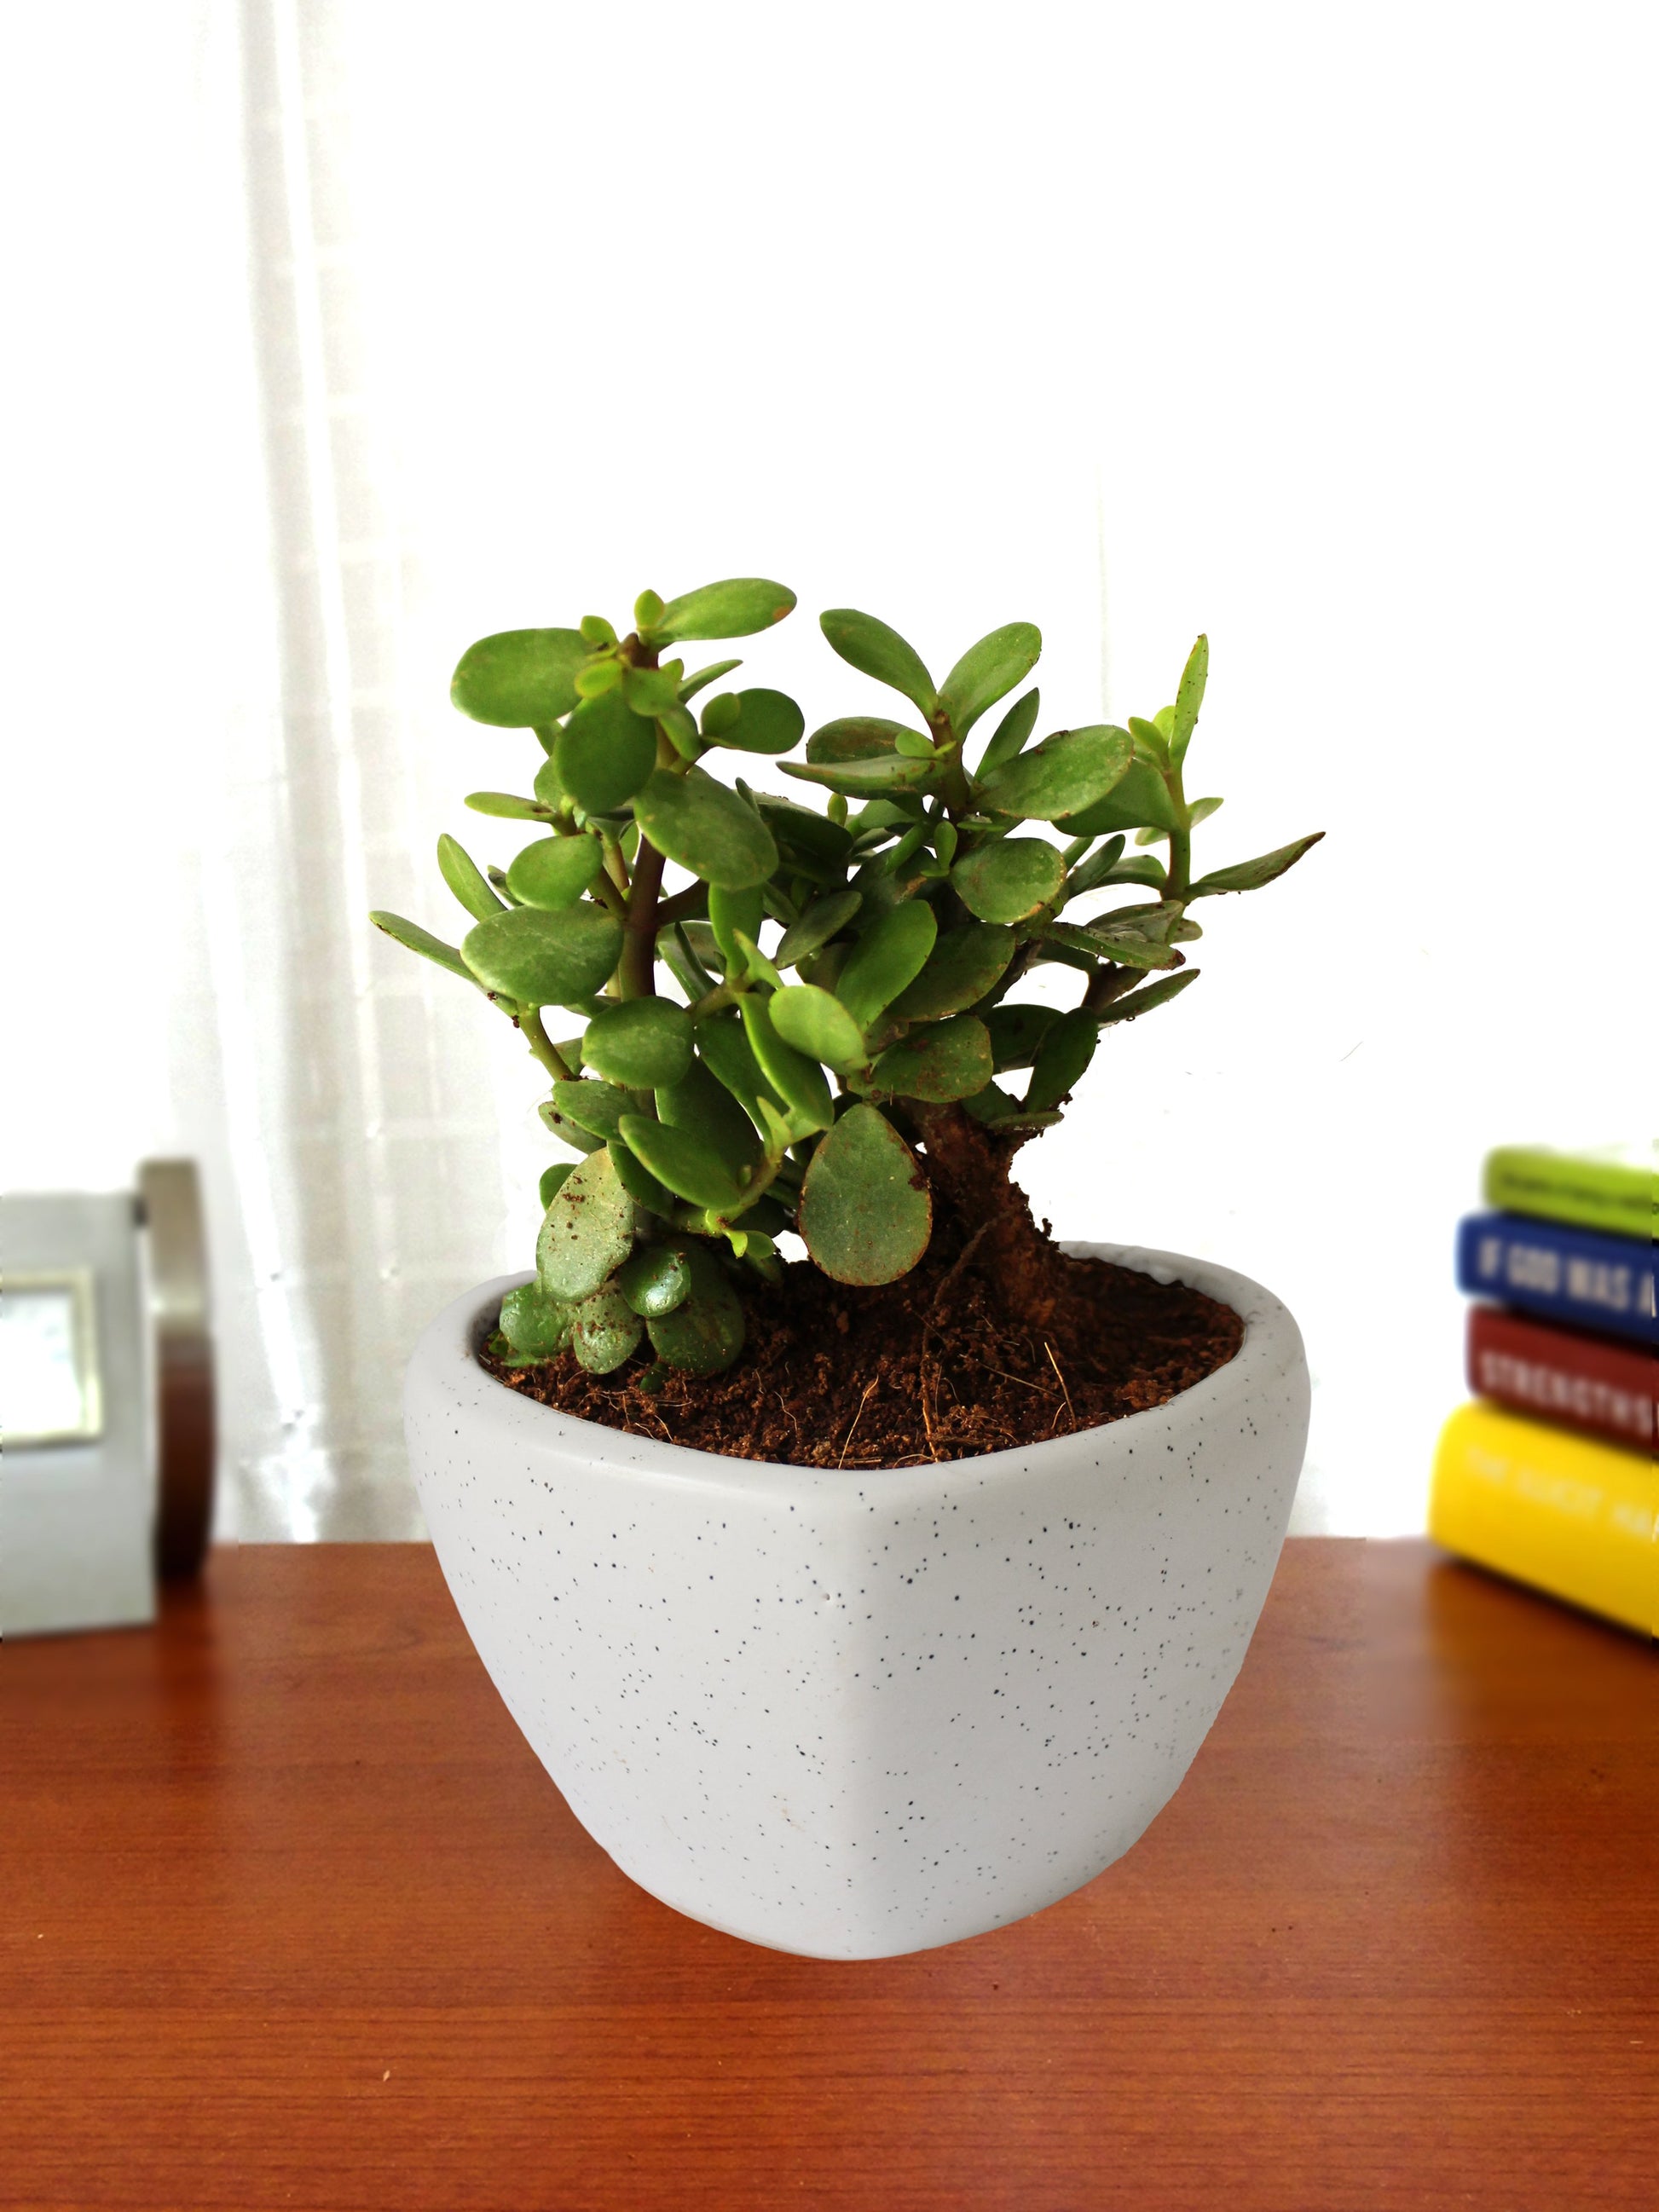 Air Purifying Good Luck Live Natural Plants in Exquisite Ceramic Pots. Best Indoor Plants online in India. Best green gifts for corporate or any occasions. Love plants as gifts. Crassula Jade quality houseplants shipped all over India.